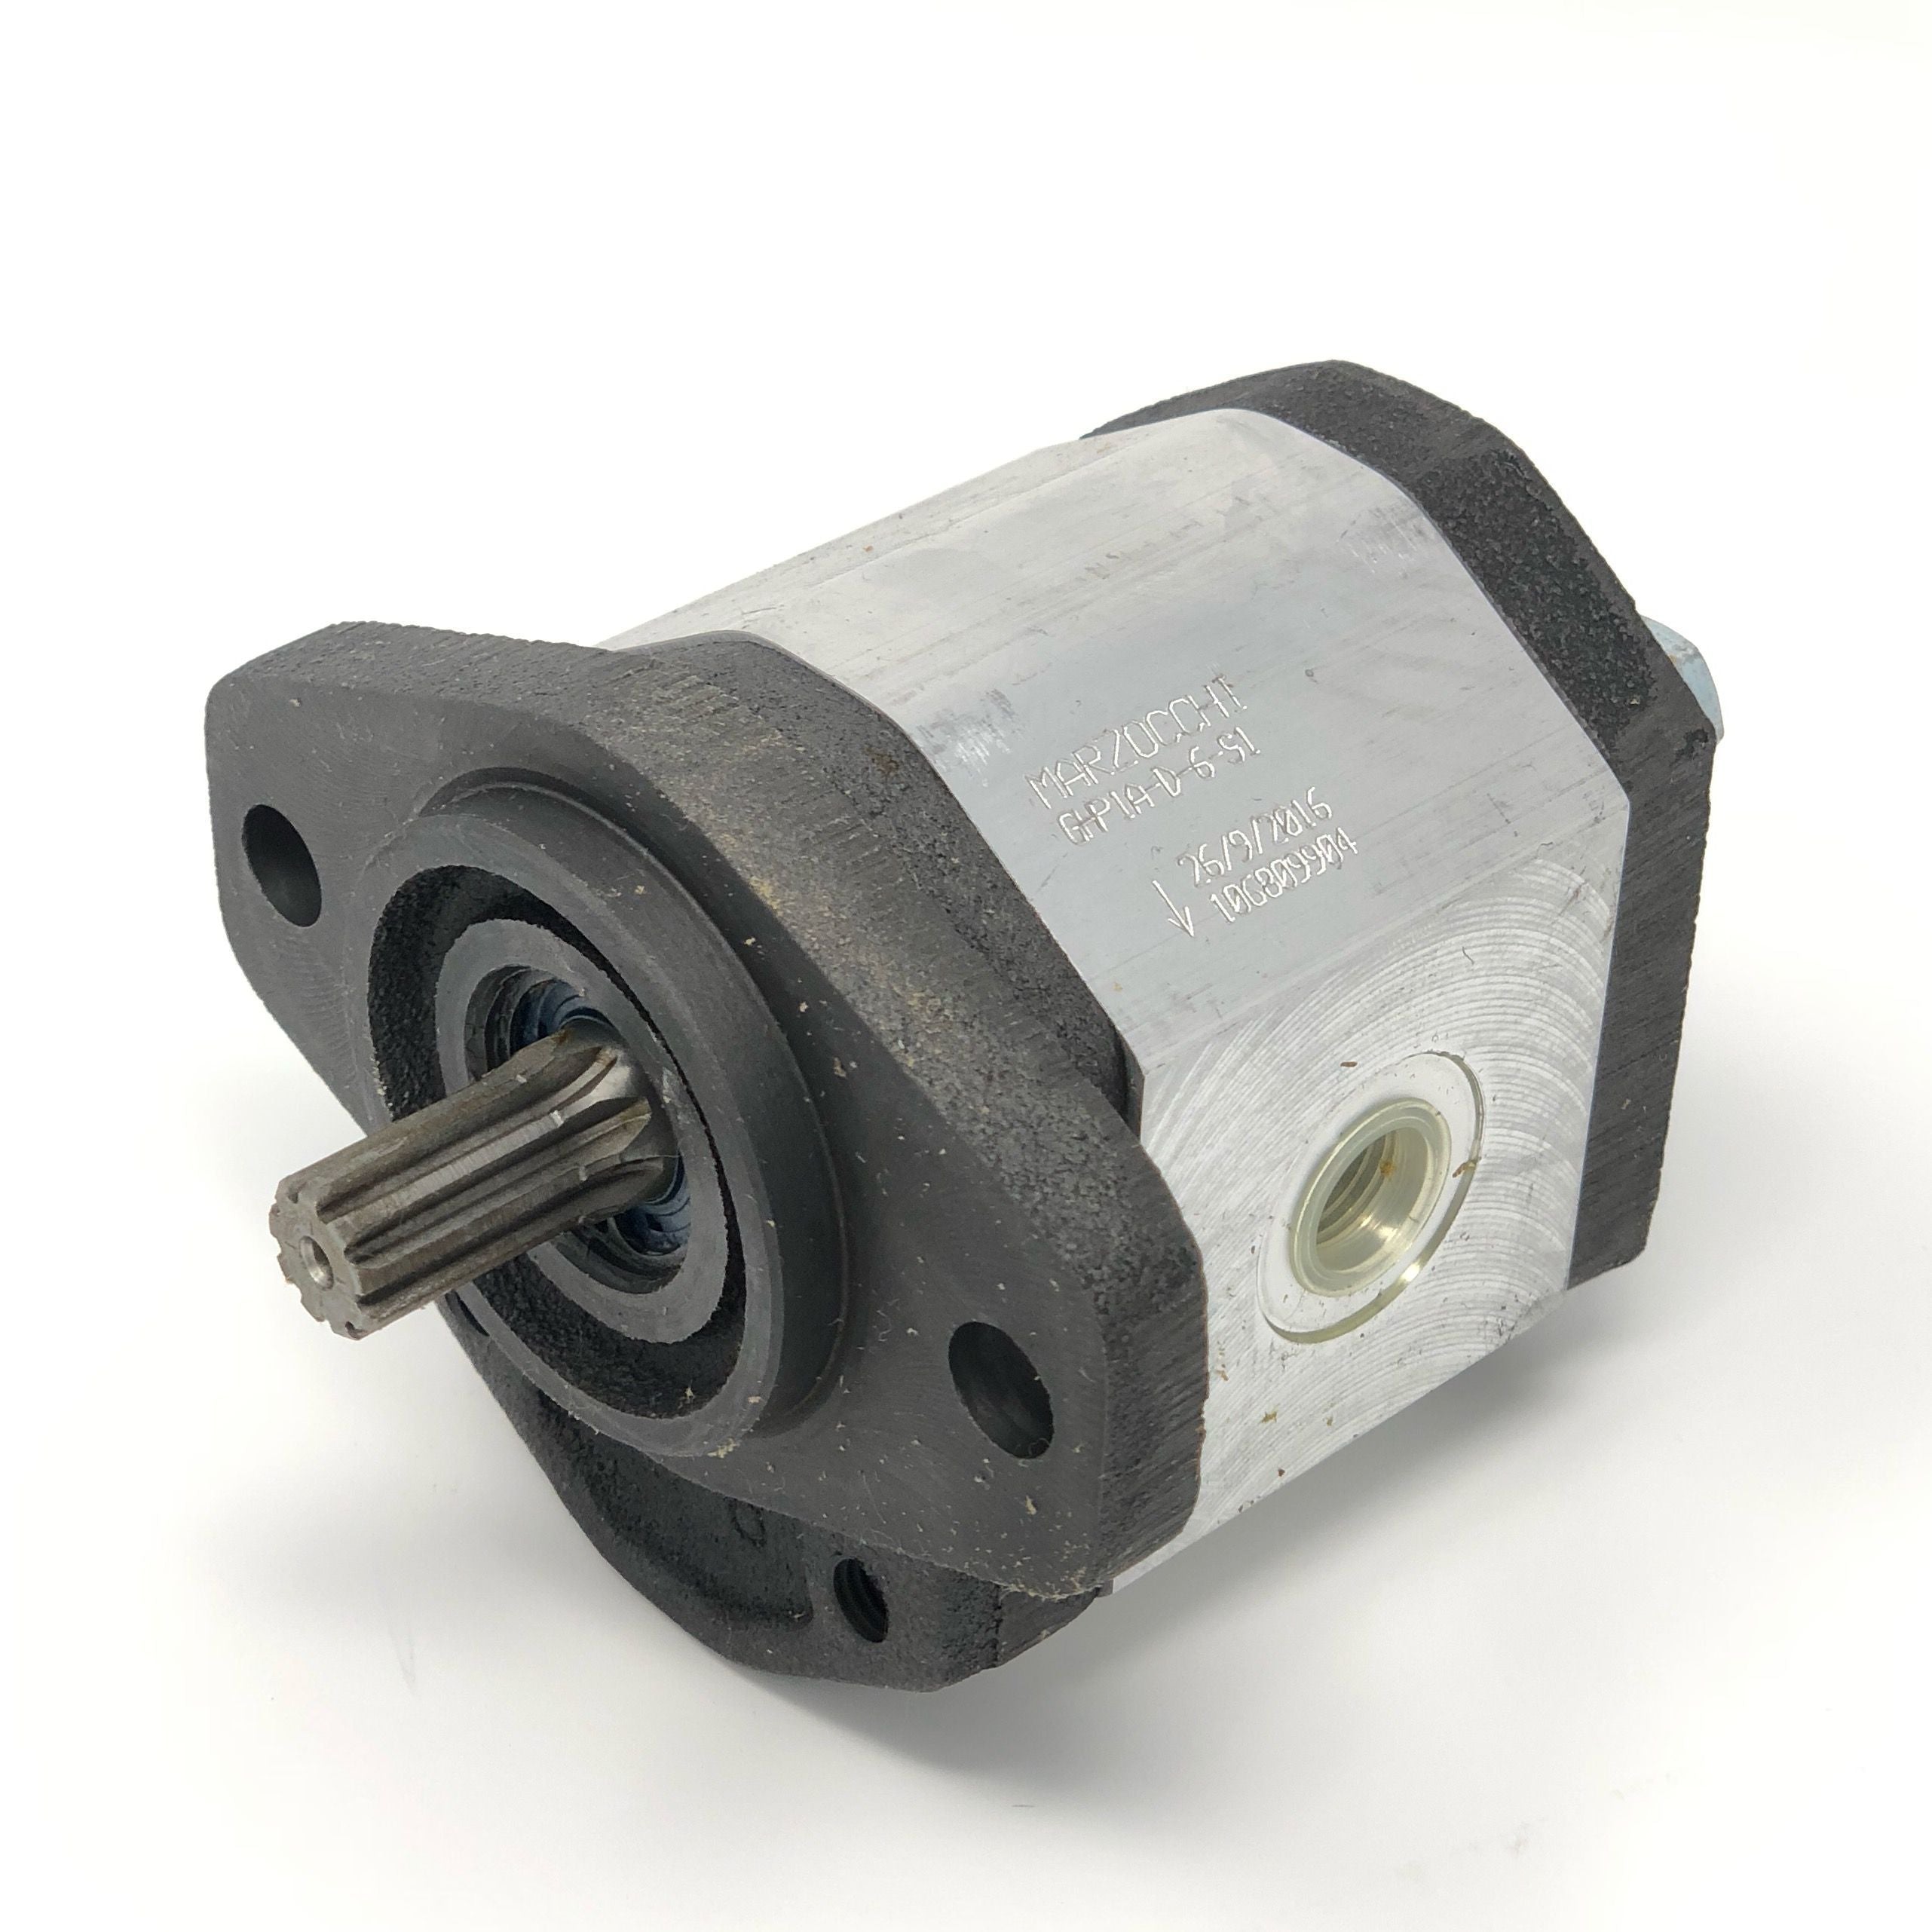 GHP1A-D-6-S1 : Marzocchi Gear Pump, CW, 4.1cc (0.2501in3), 1.95 GPM, 3915psi, 4000 RPM, #8 SAE (1/2") In, #6 SAE (3/8") Out, Splined Shaft 9T 20/40DP, SAE AA 2-Bolt Mount